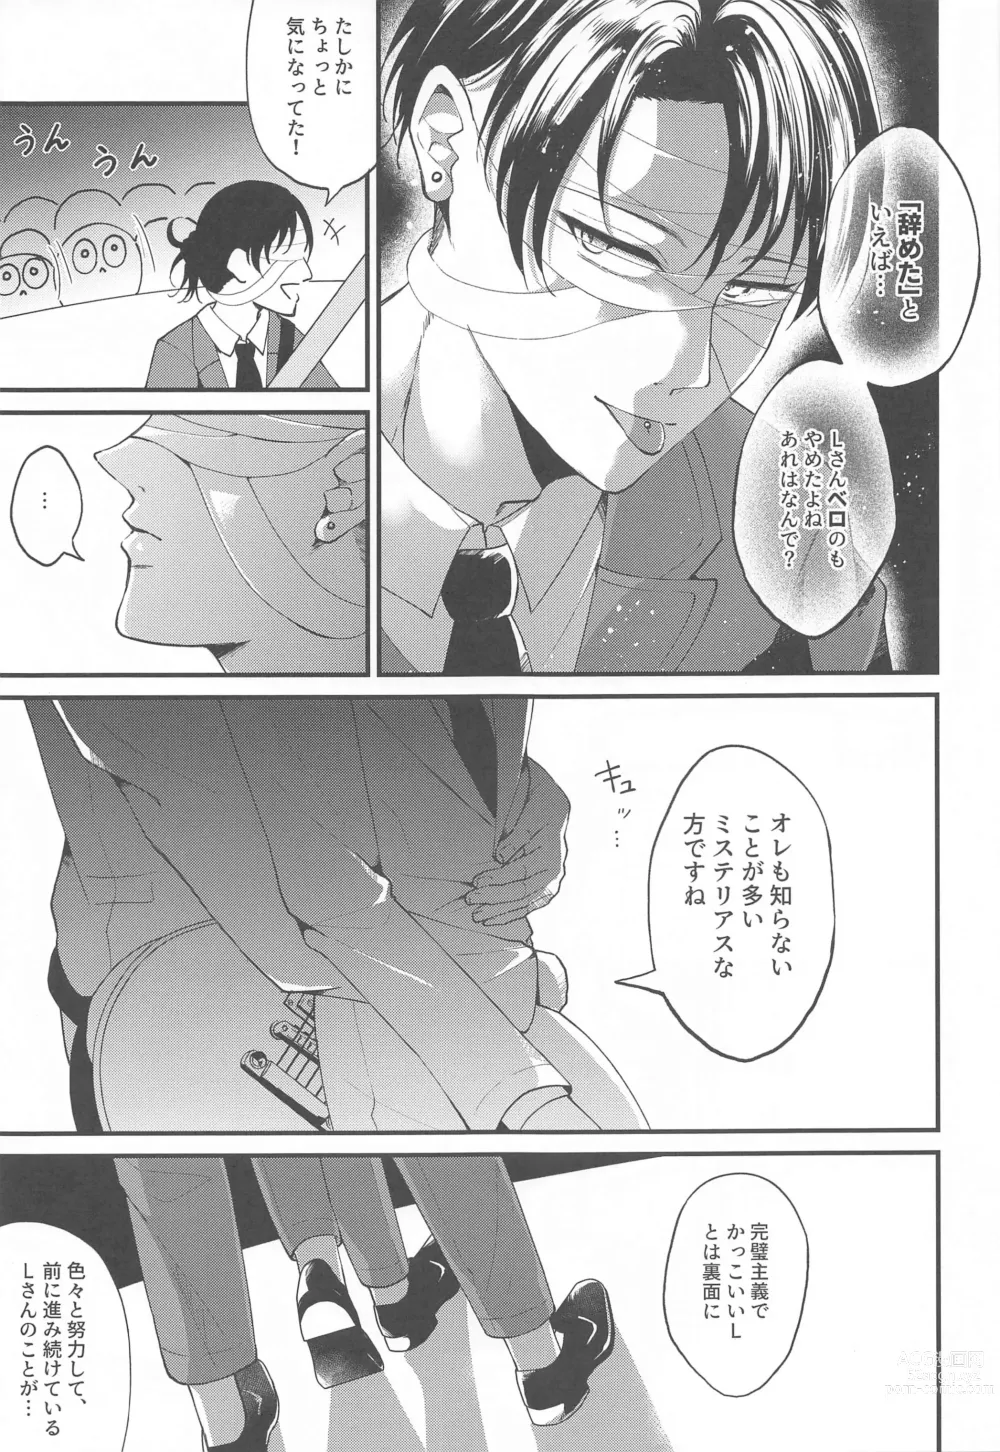 Page 14 of doujinshi Suggestive Birthday